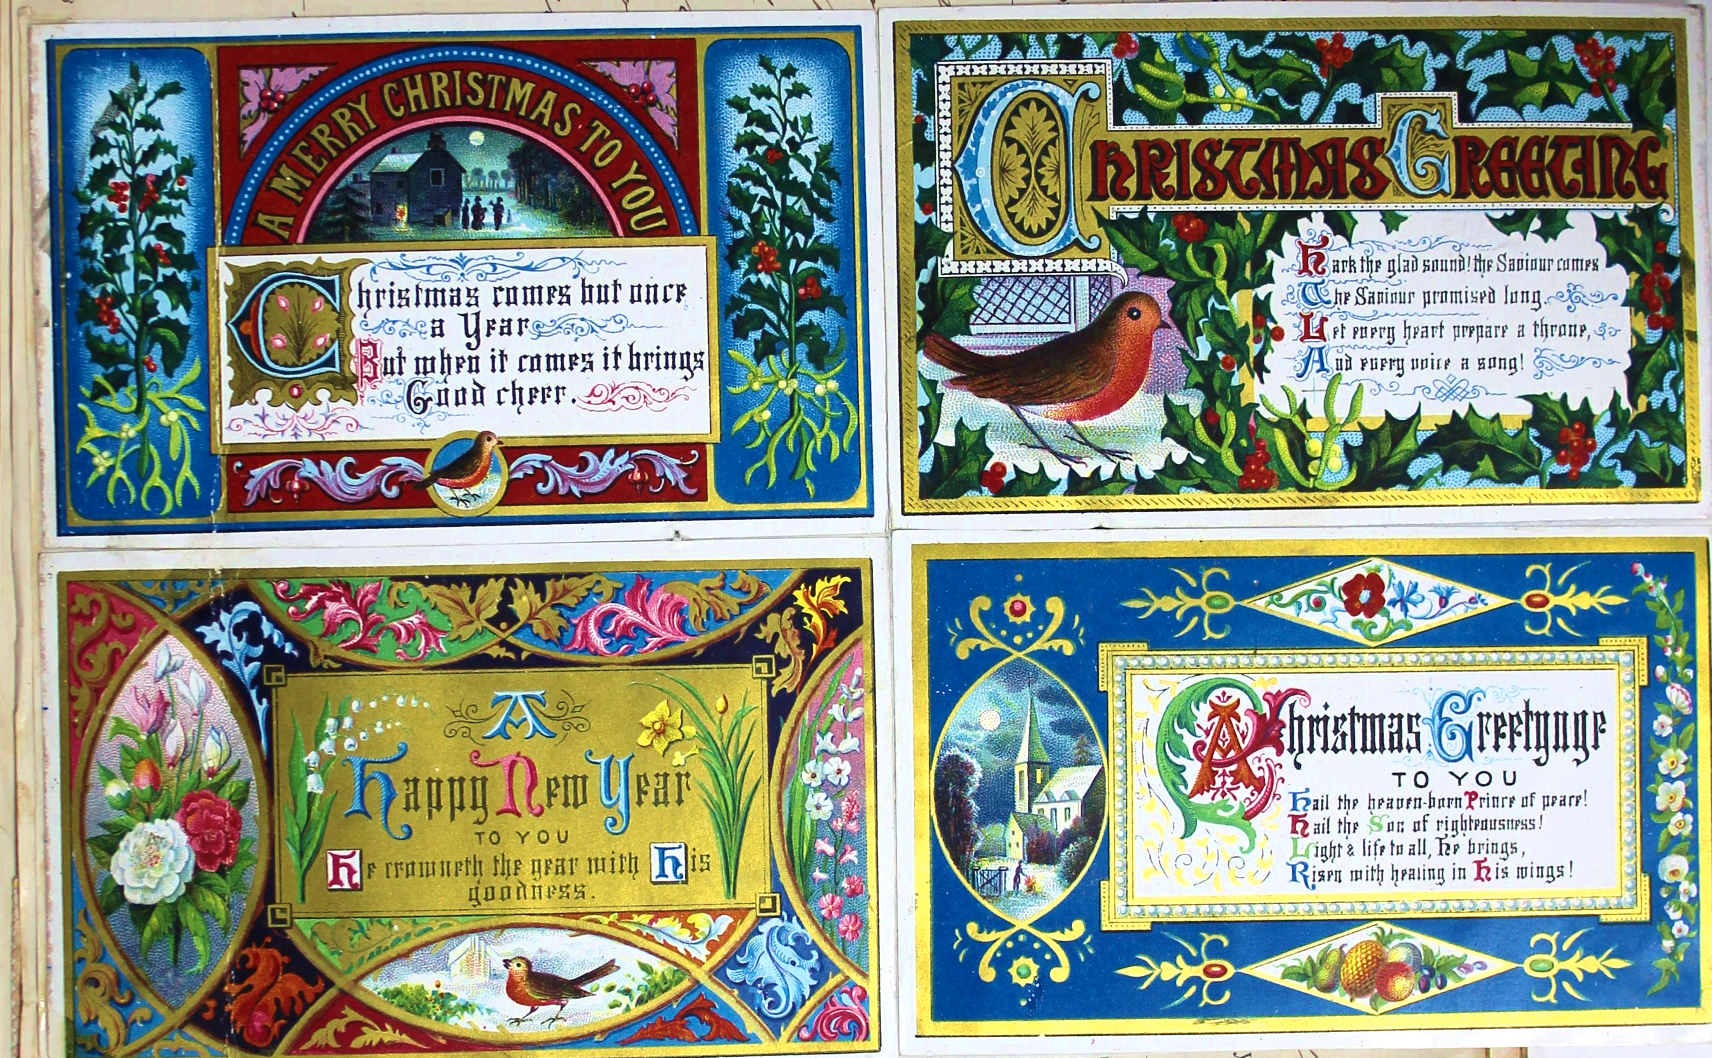 Above: A drawing of four illuminated Christmas cards by T Sulman dating back to 1871.